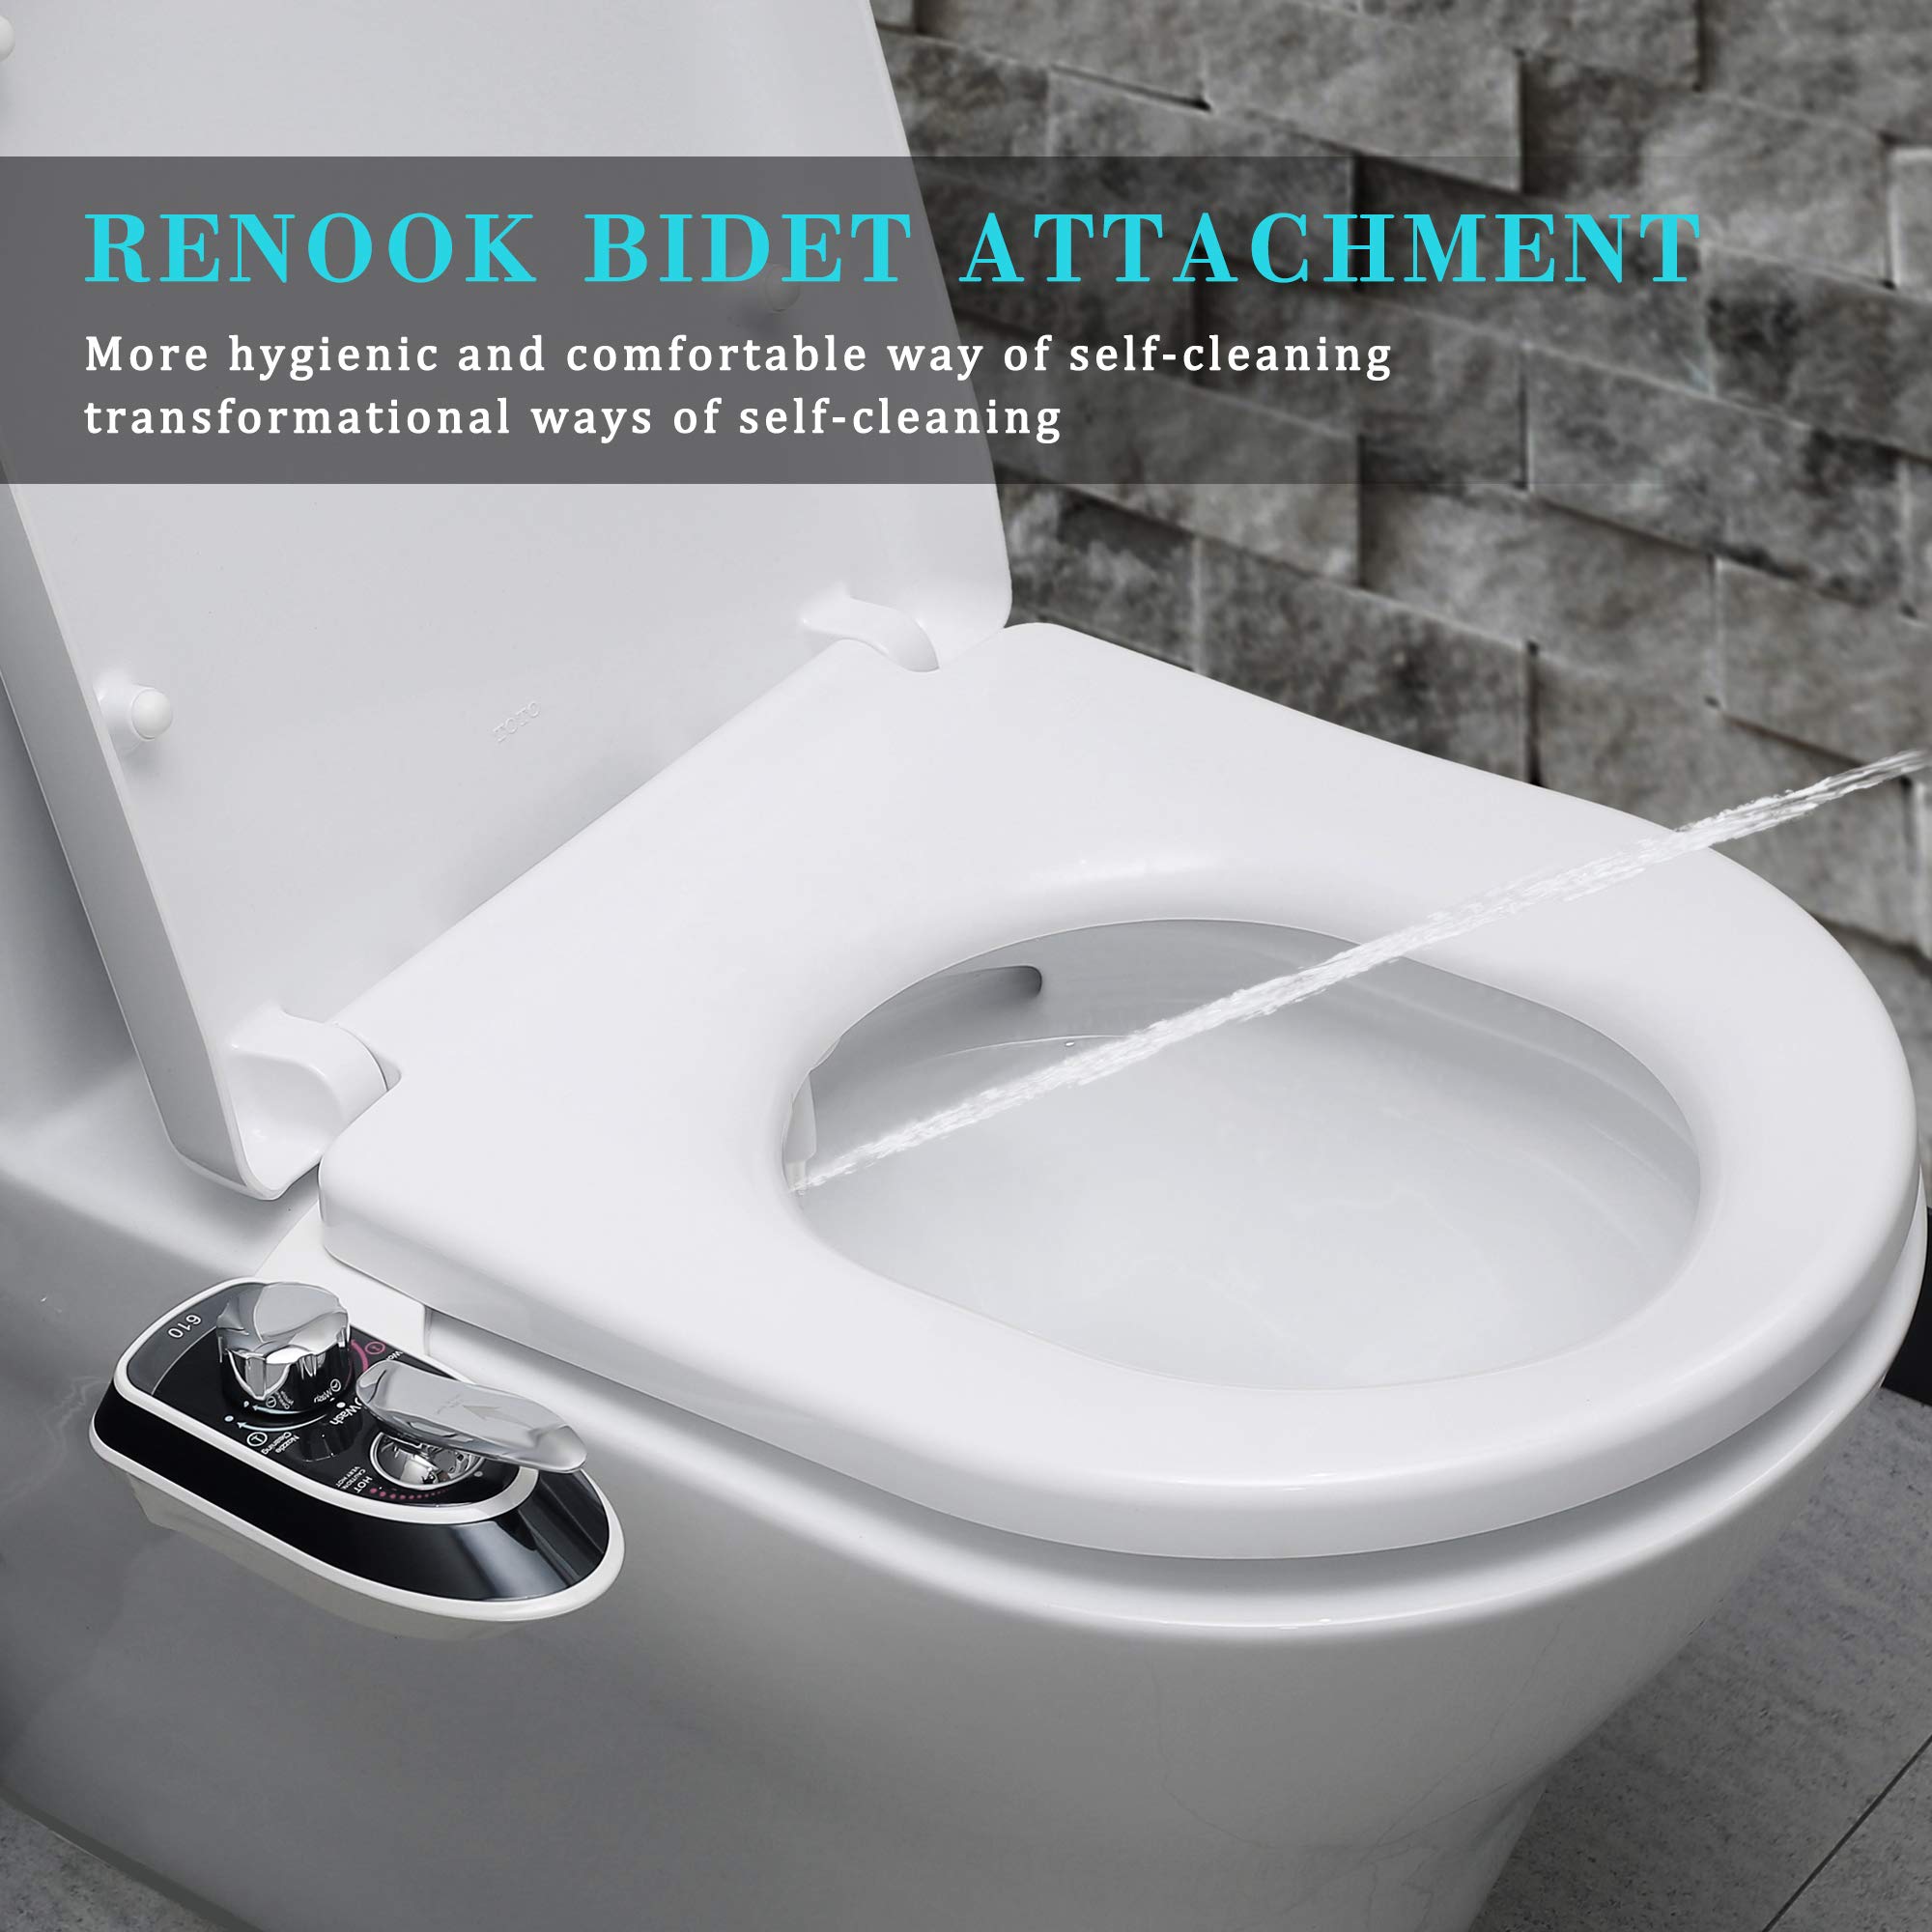 RENOOK Fresh Water Bidet Attachment for Toilet - Self Cleaning Dual Nozzle Sprays Hot & Cold Water – Non Electric Bidet Toilet Seat Attachment - Toilet Washer Bidet Seat for Female & Male Hygiene.